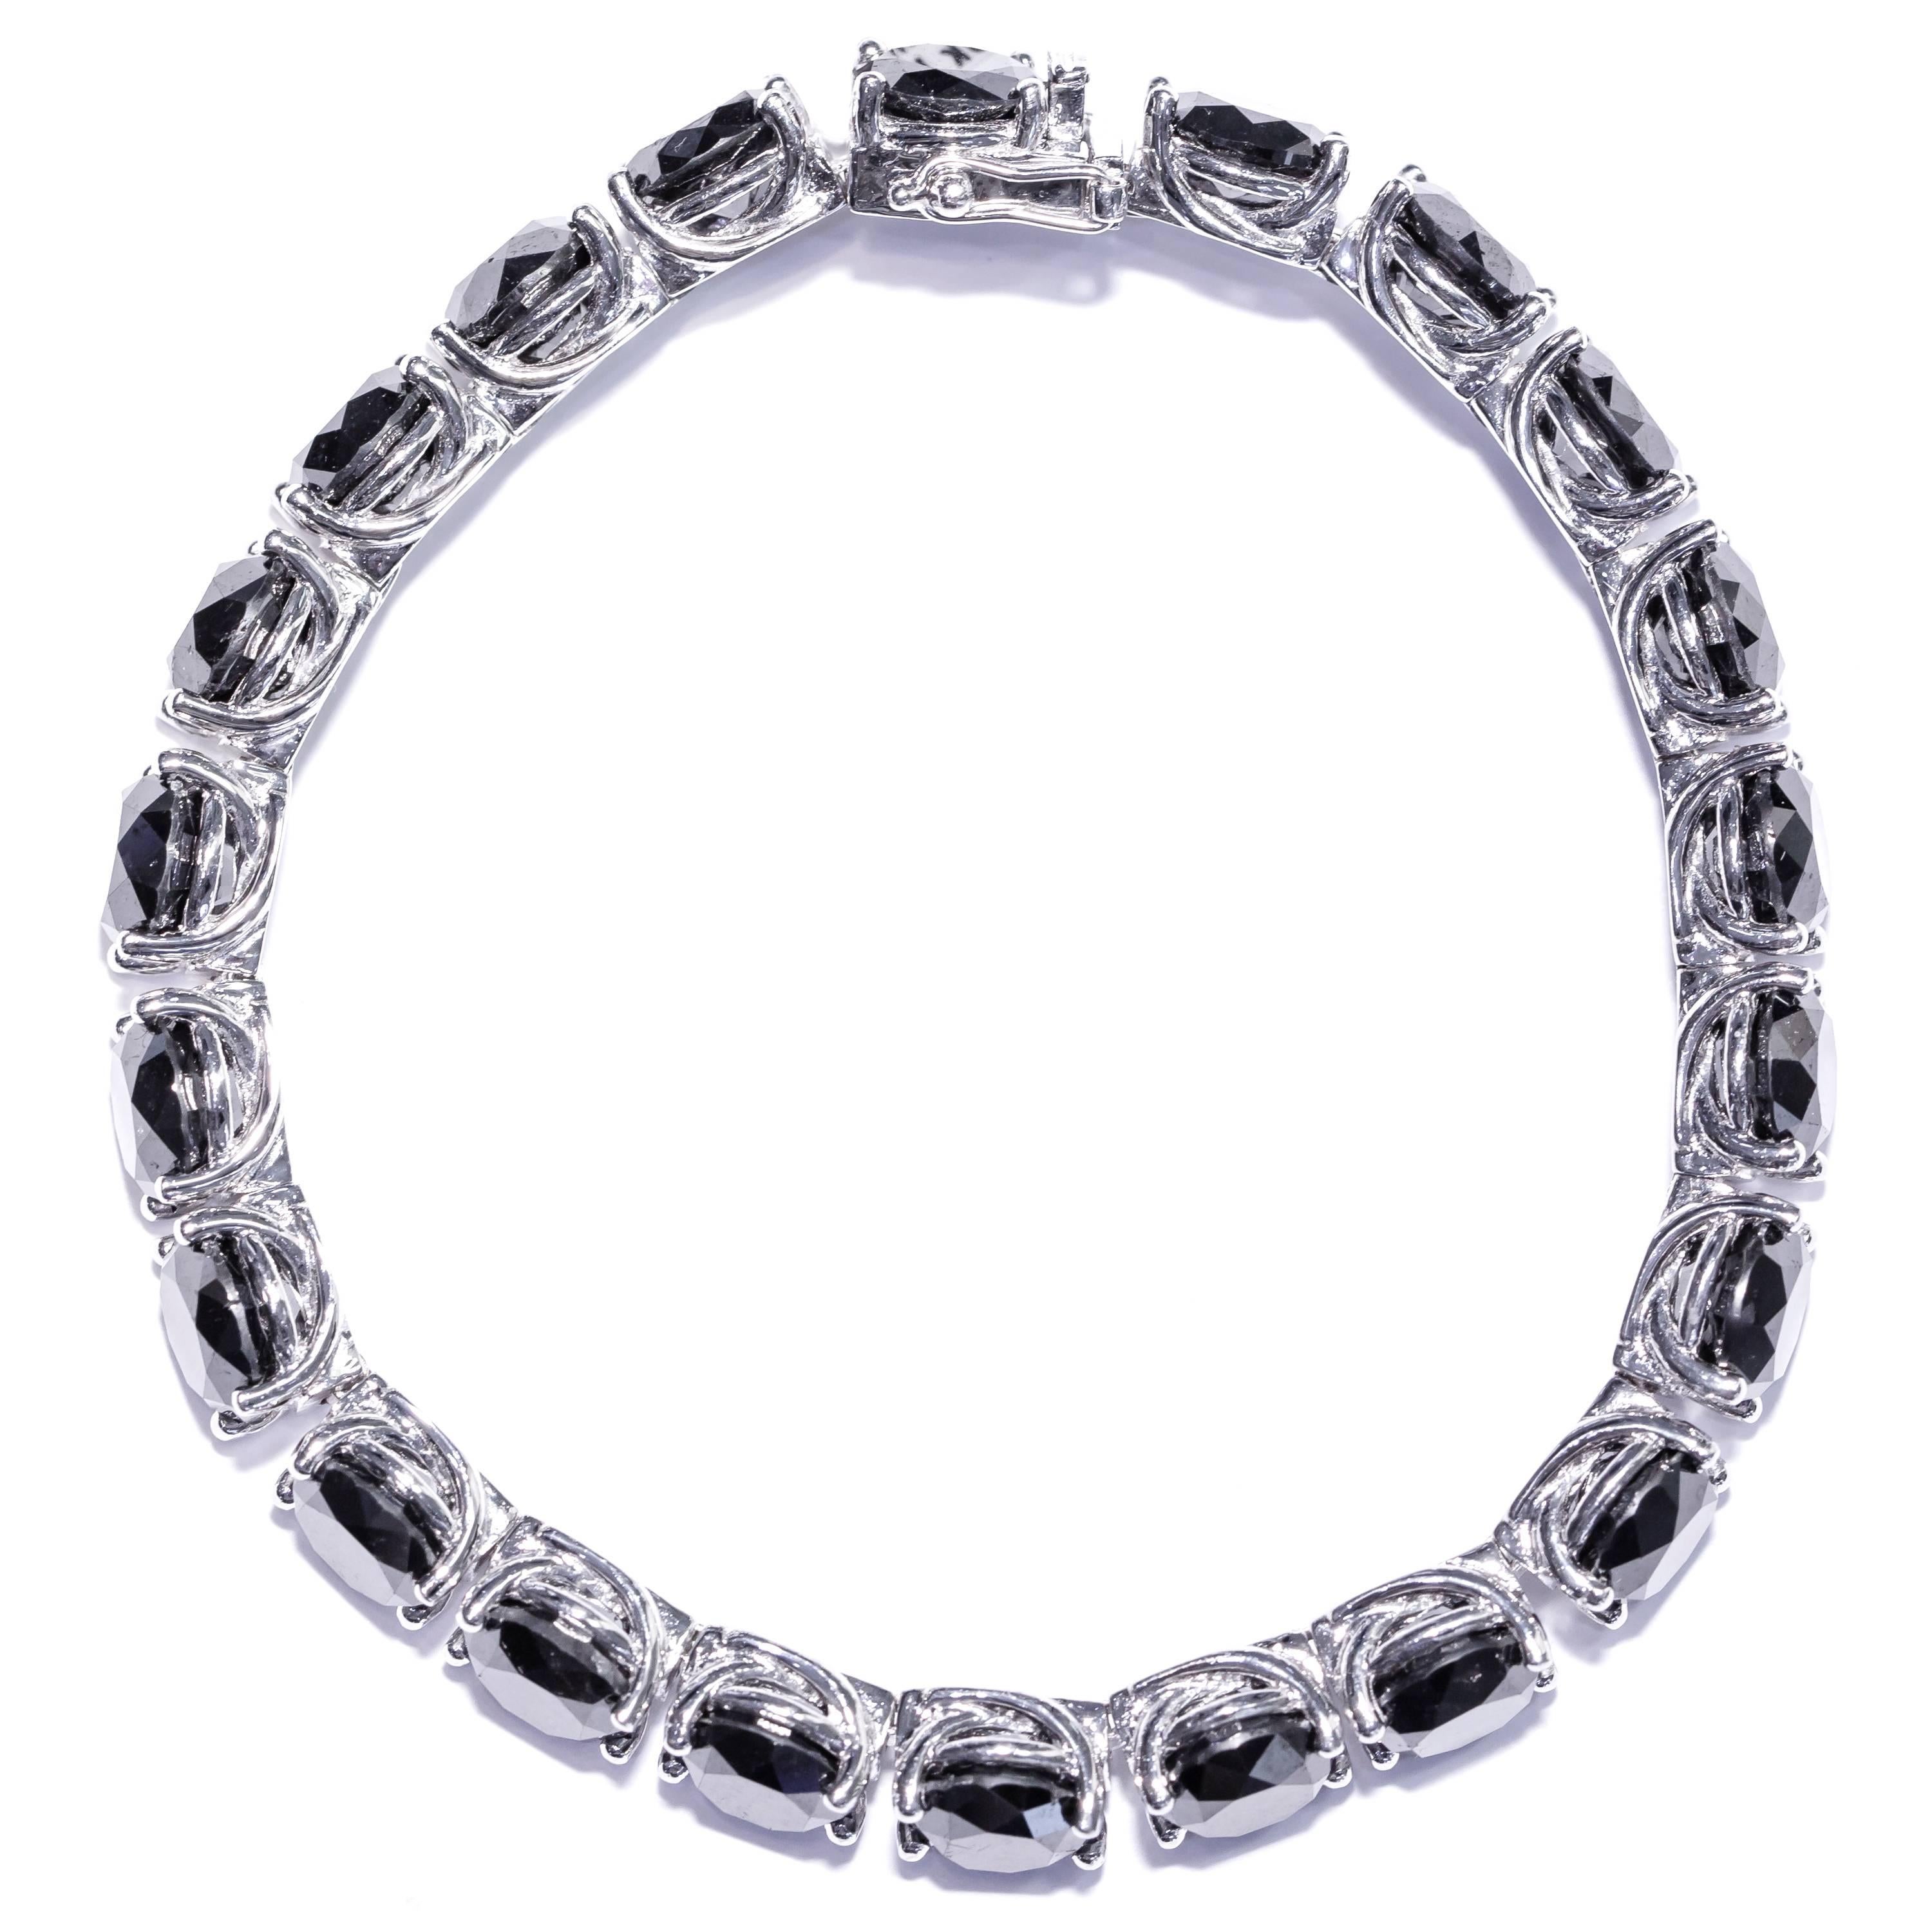 This stunning Black Diamond classic tennis bracelet features 22 stones weighing 49.68 Carats. This 18 Karat bracelet has a safety lock on the clasp, Total weight of the bracelet is 42 Grams, and is 7.5 inches long. Made by Tresor Paris this Bracelet